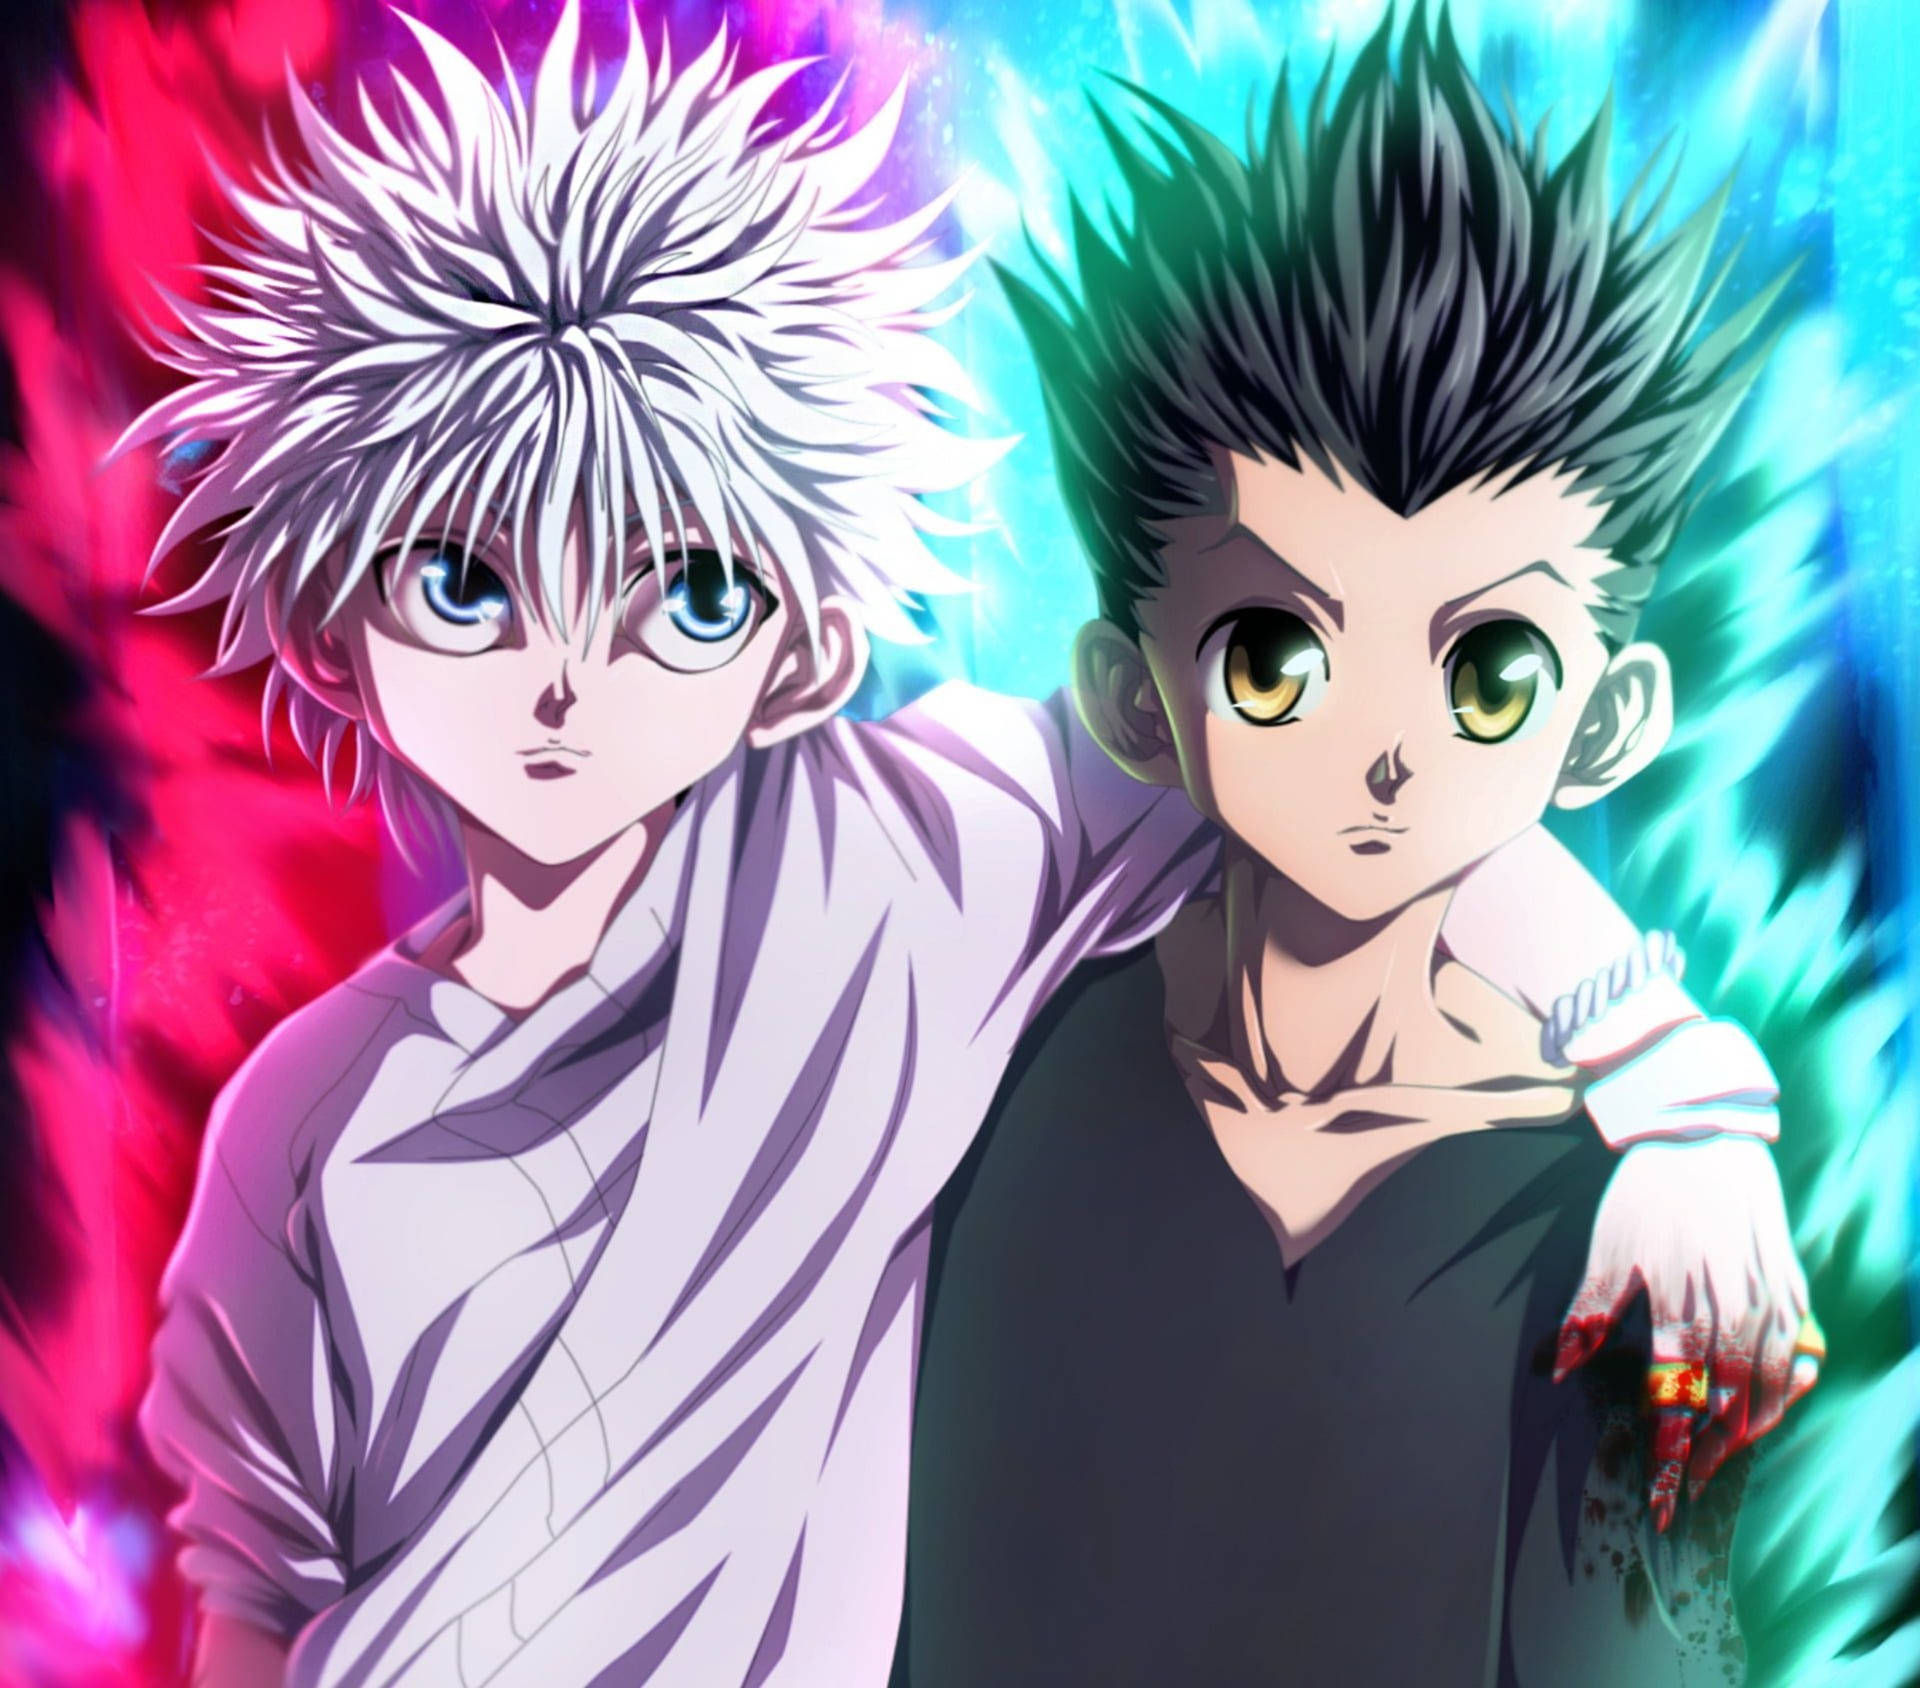 Download Follow Gon Freecss in his epic journey for a better tomorrow in  the anime classic 'Hunter x Hunter' Wallpaper